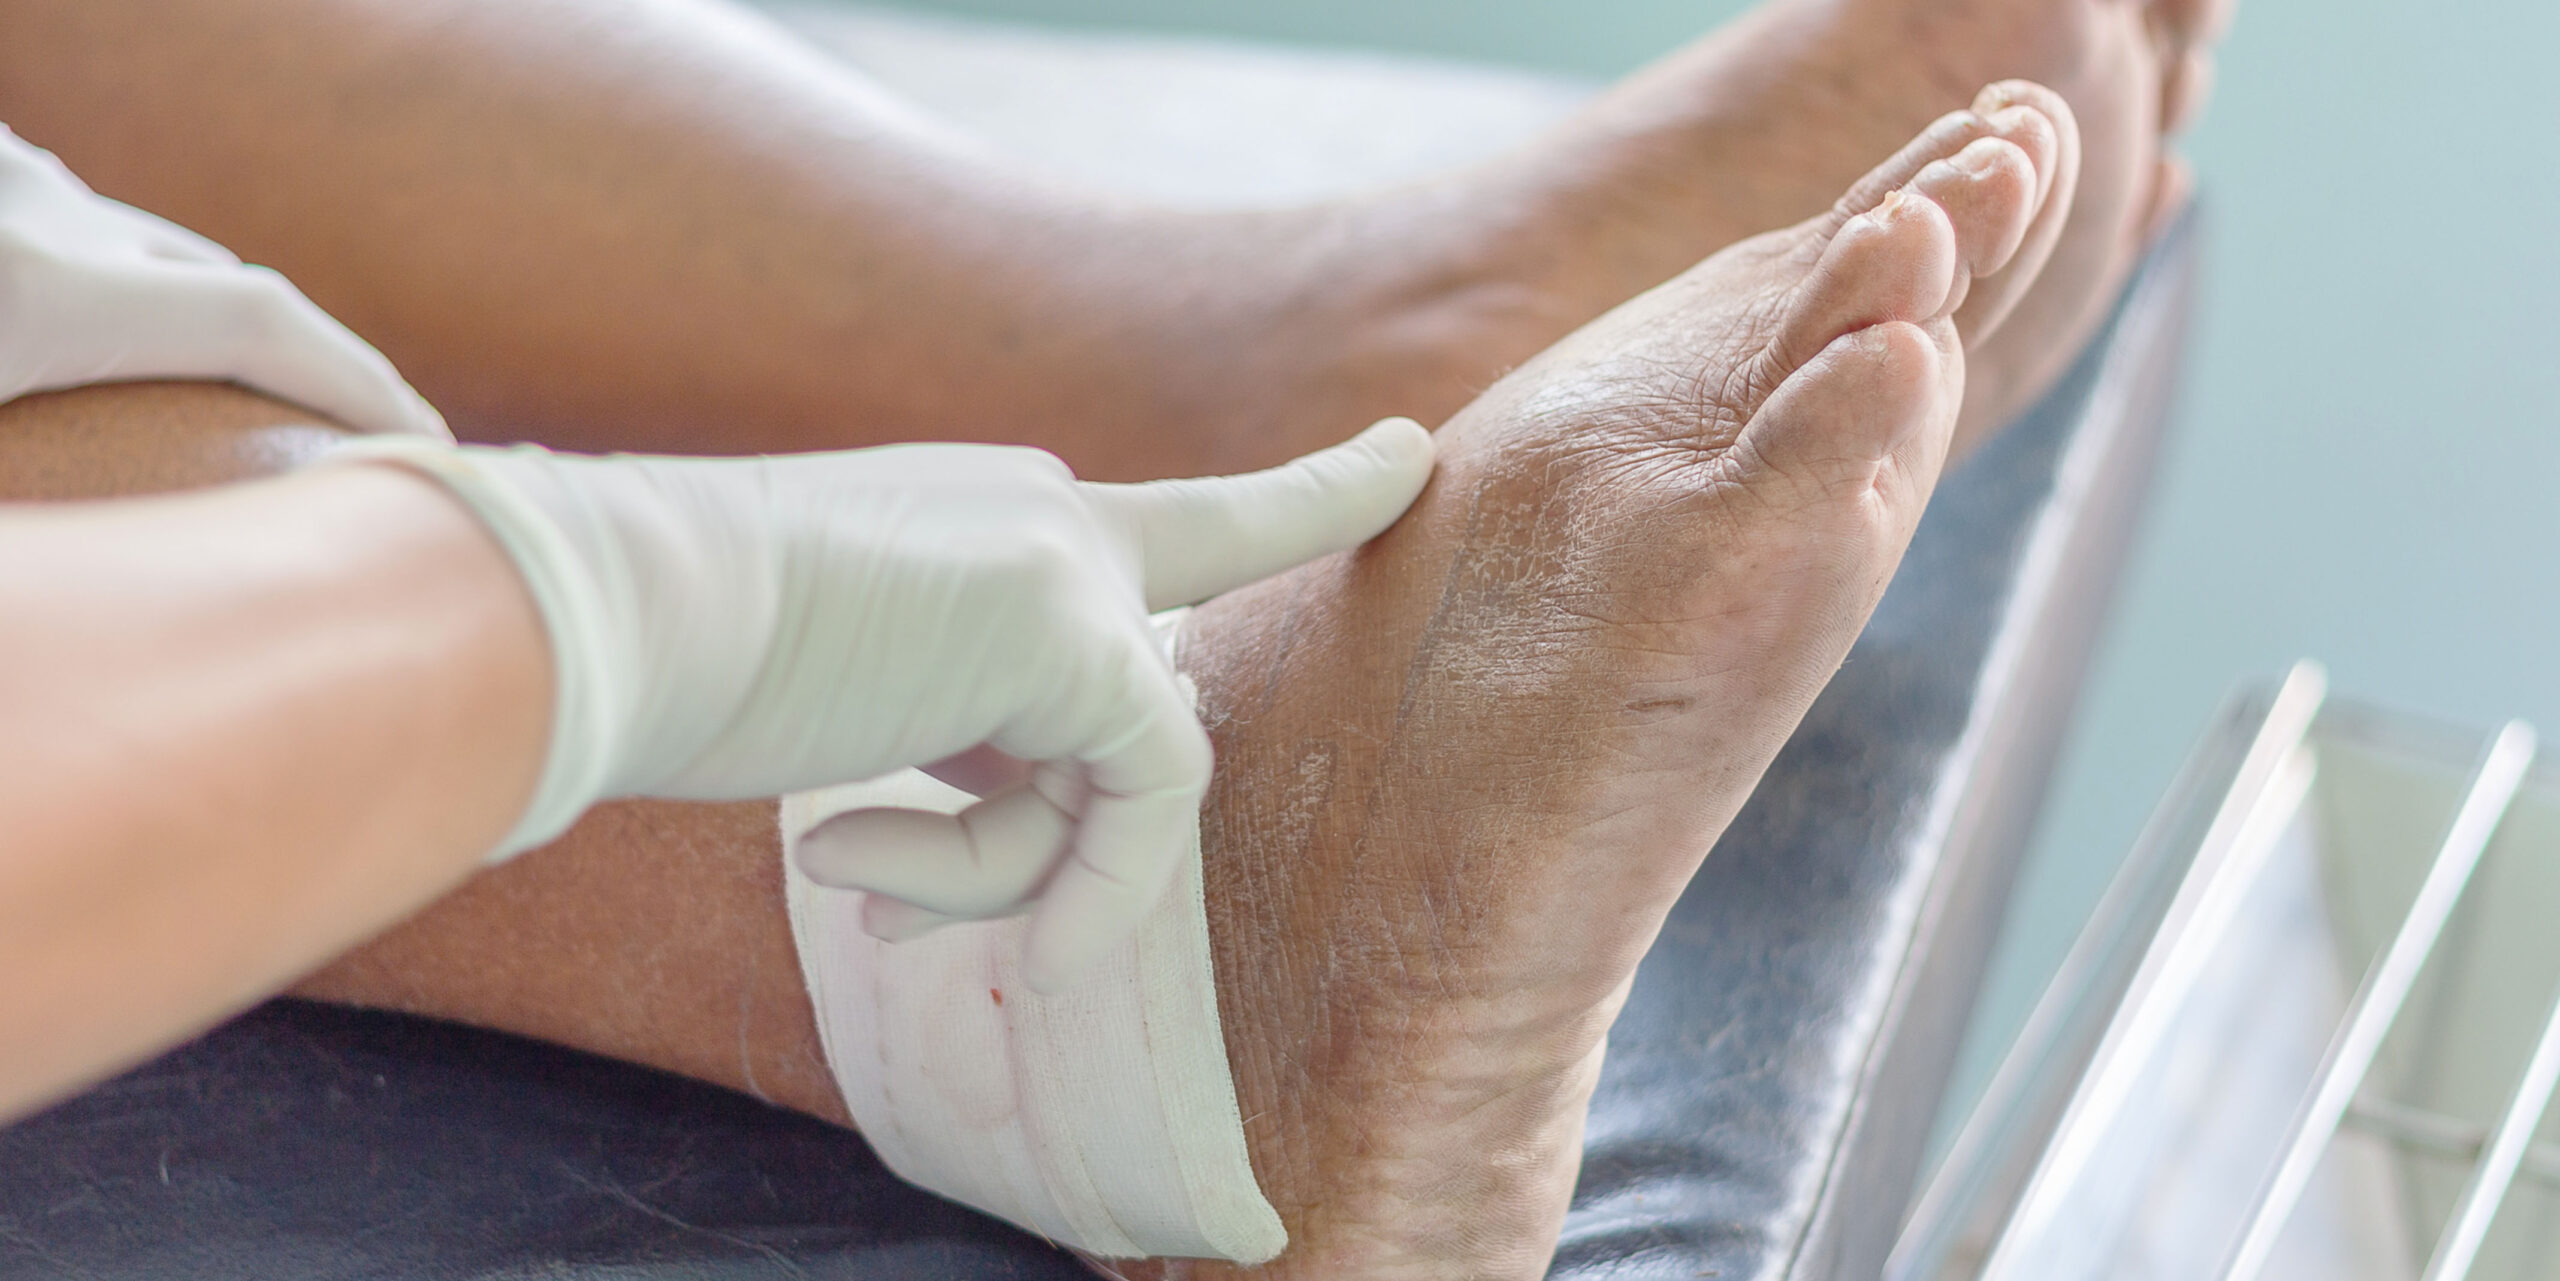 How FritzFinn Helps Wound Care Providers Create a More Personalized Patient Experience